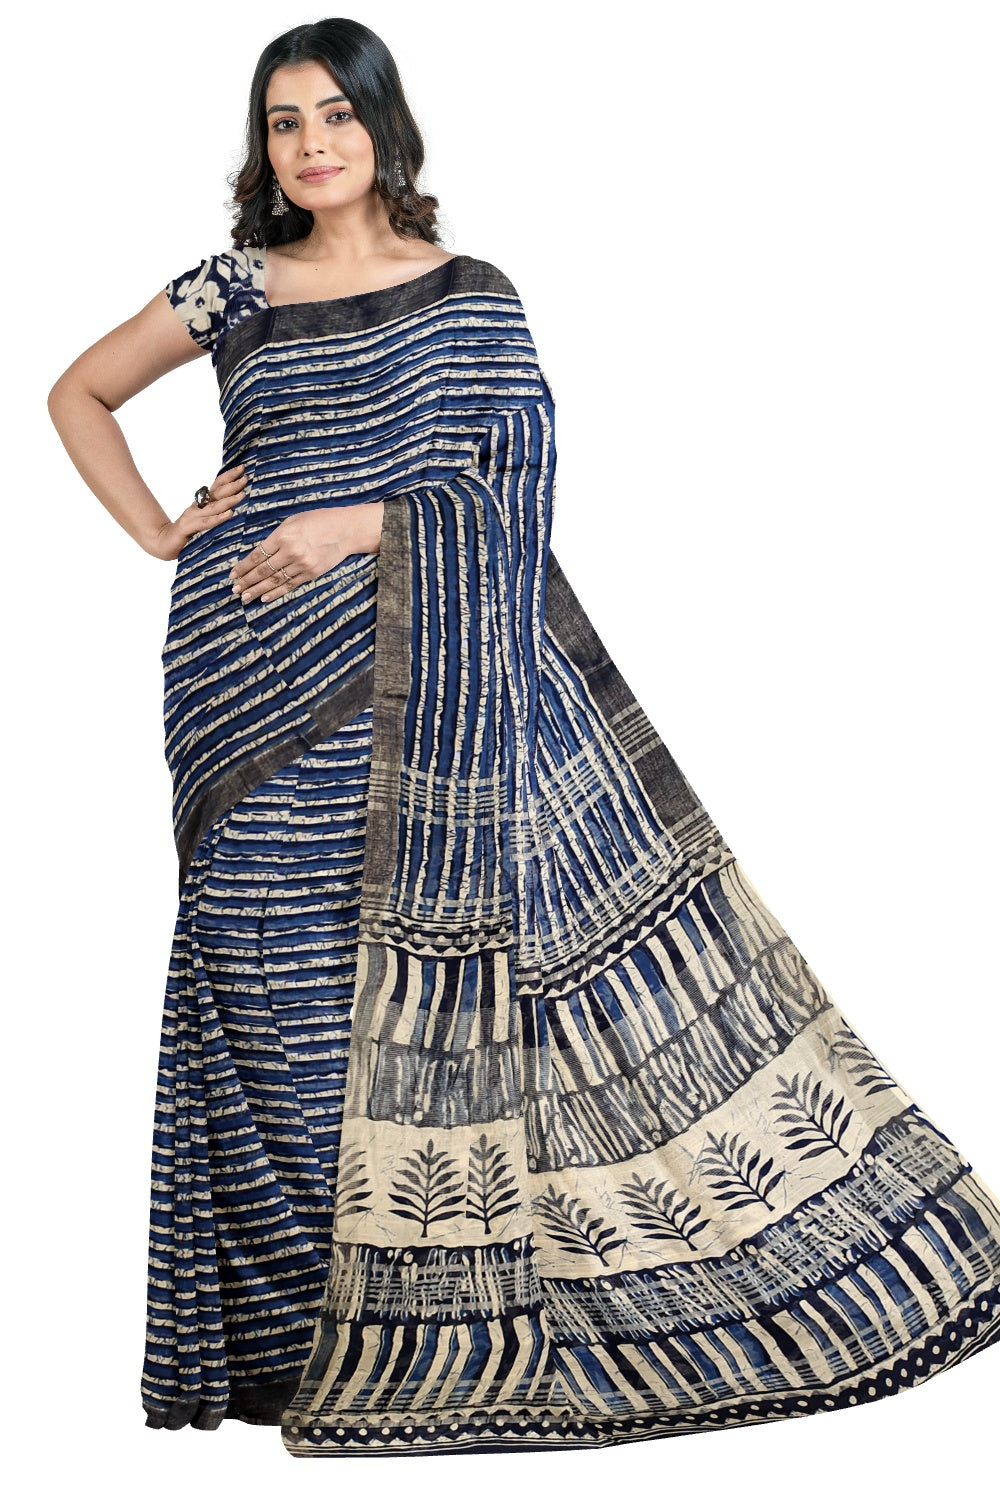 Southloom Linen Blue and White Designer Saree